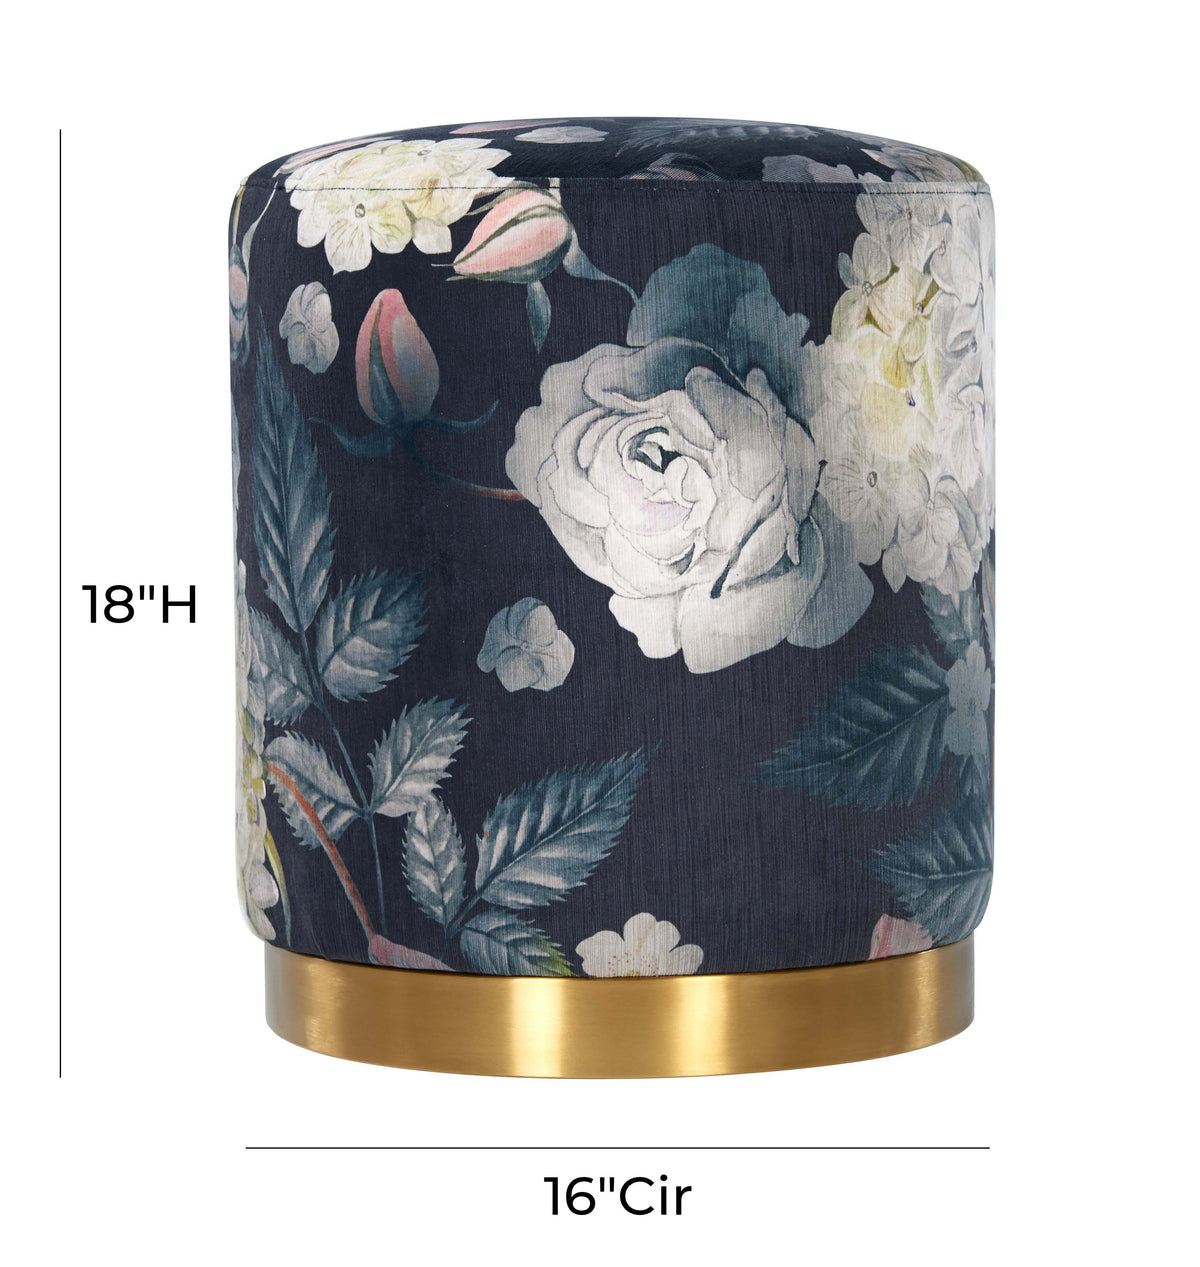 Naama Floral Velvet with Gold Base Ottoman - Luxury Living Collection